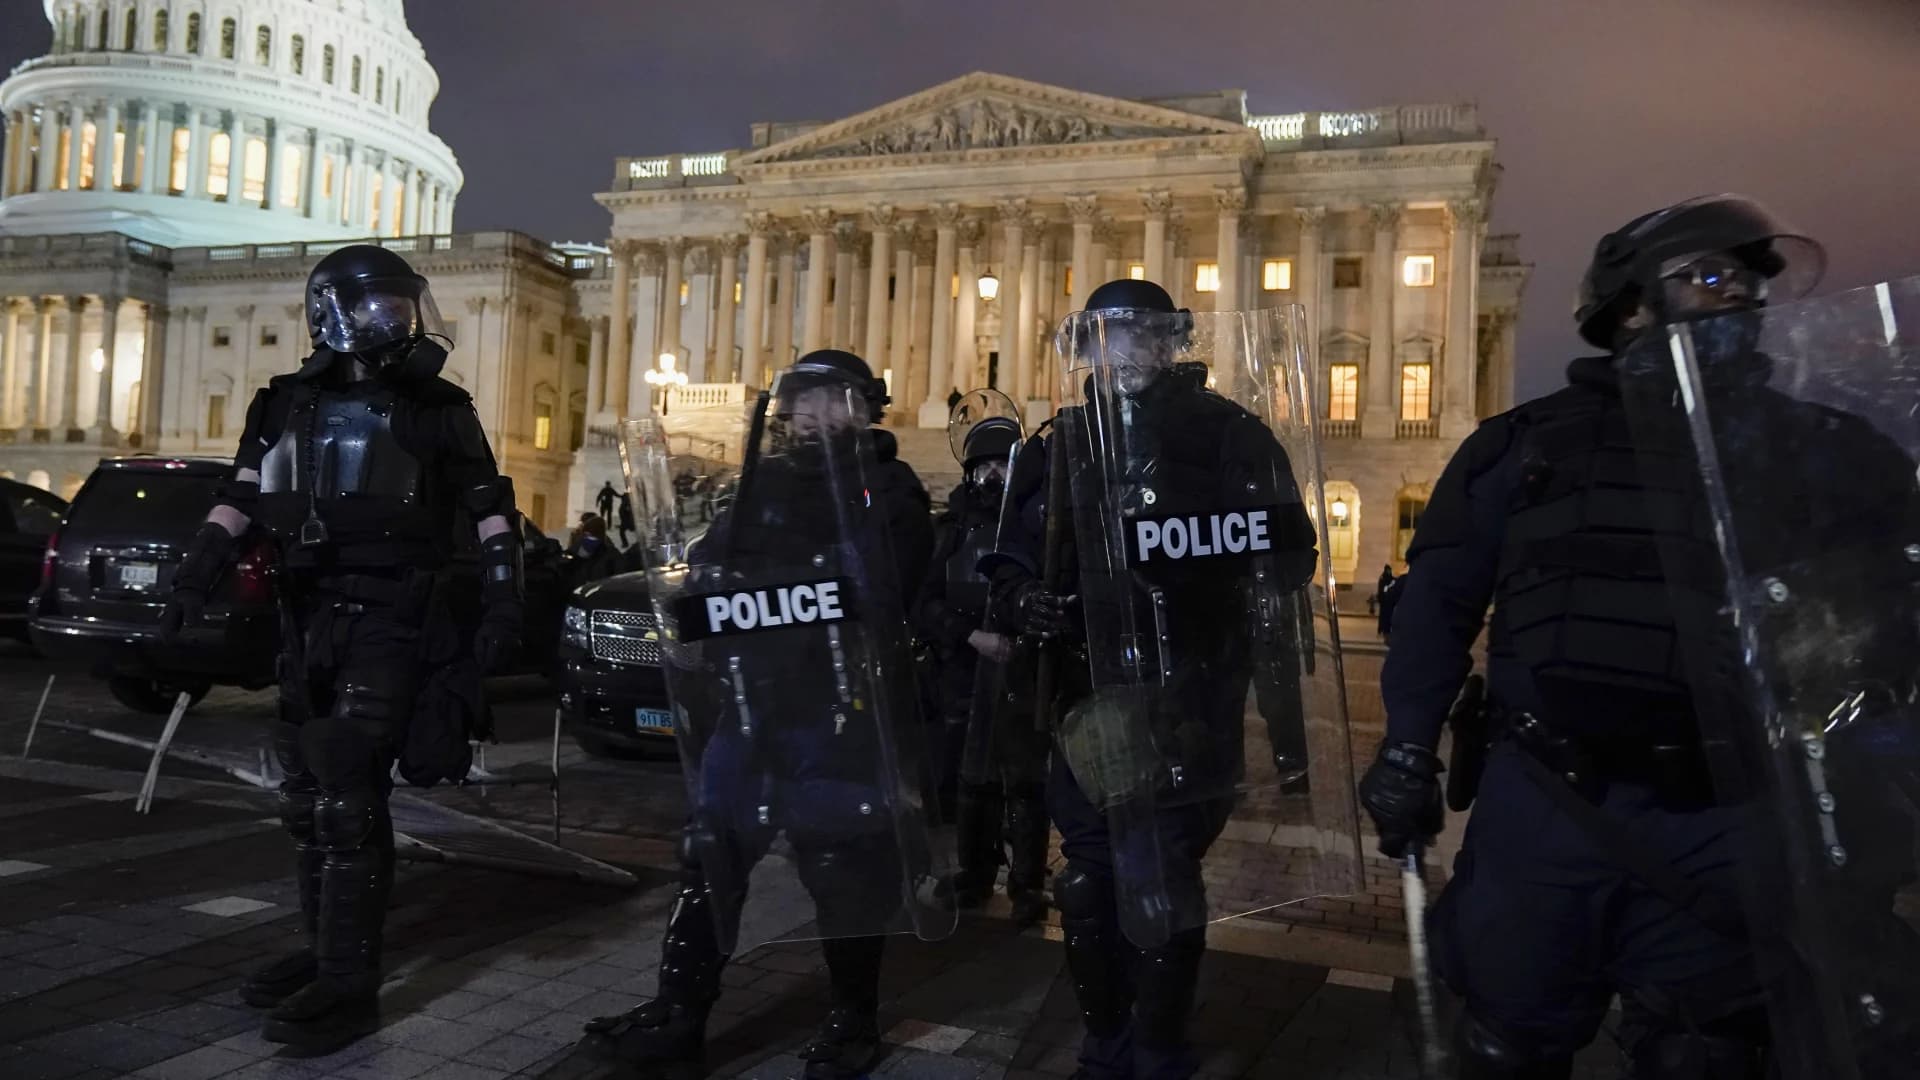 Capitol has seen violence over 220 years, but not like this